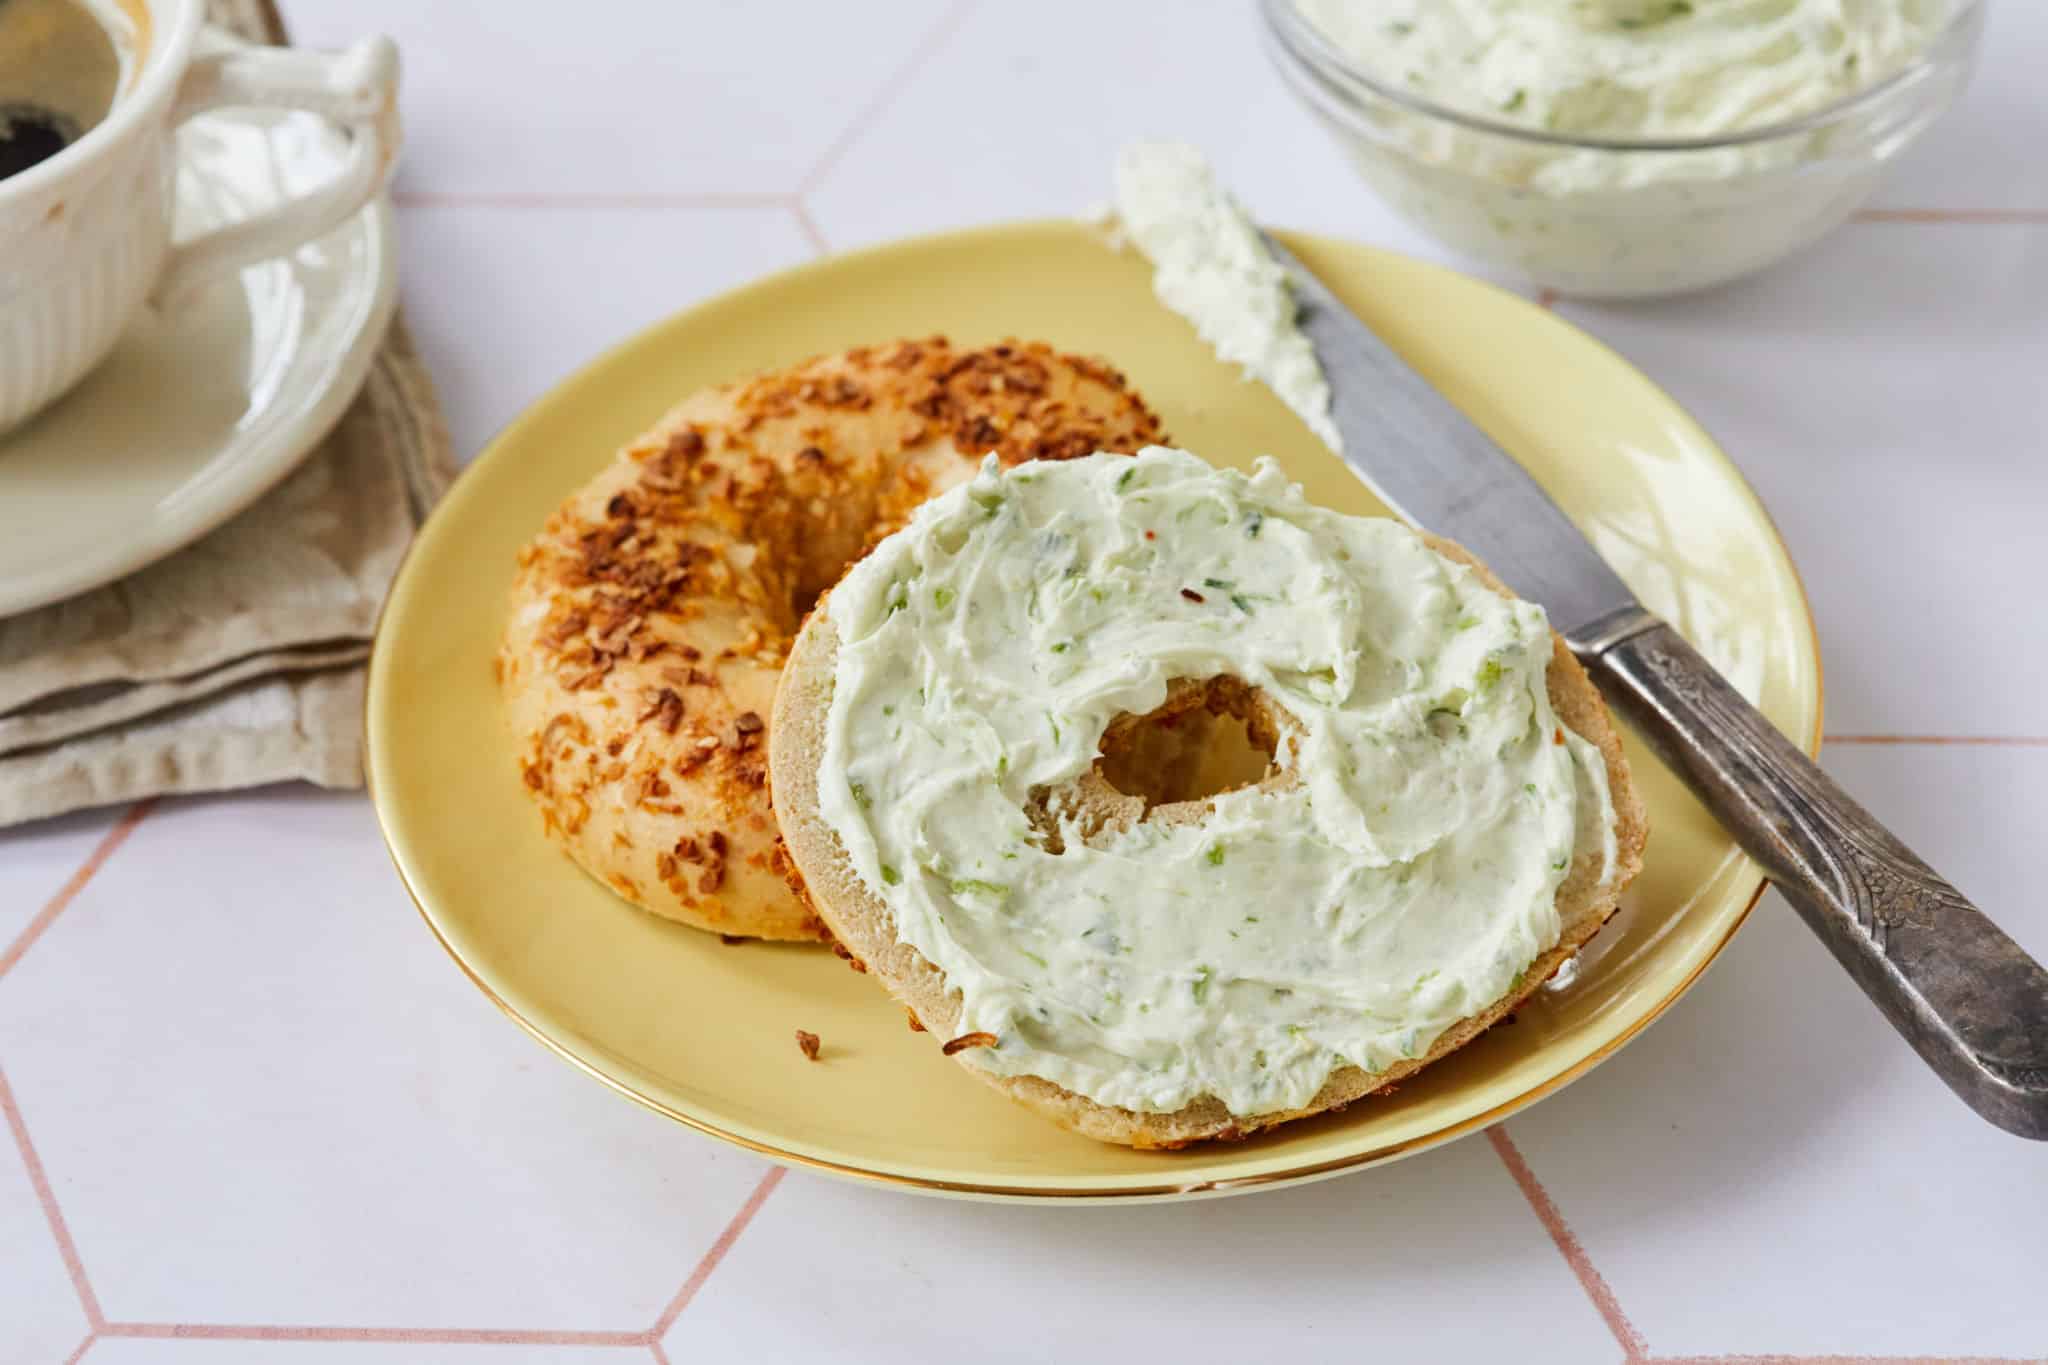 Fresh, homemade garlic and chive cream cheese is spread on an everything bagel, served on a yellow plate next to a cup of coffee.